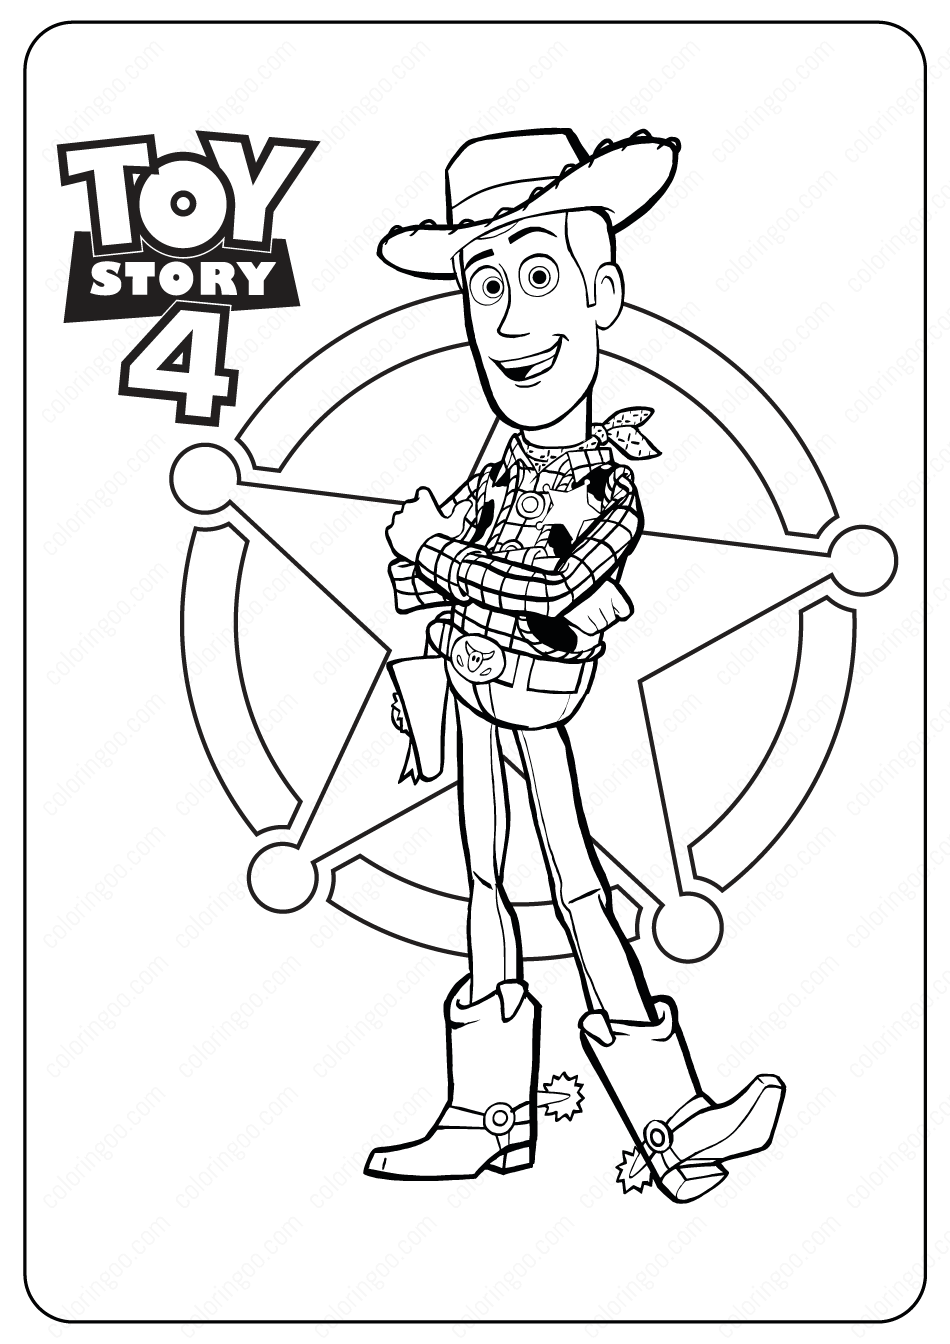 toy story 4 outline coloring pages 01